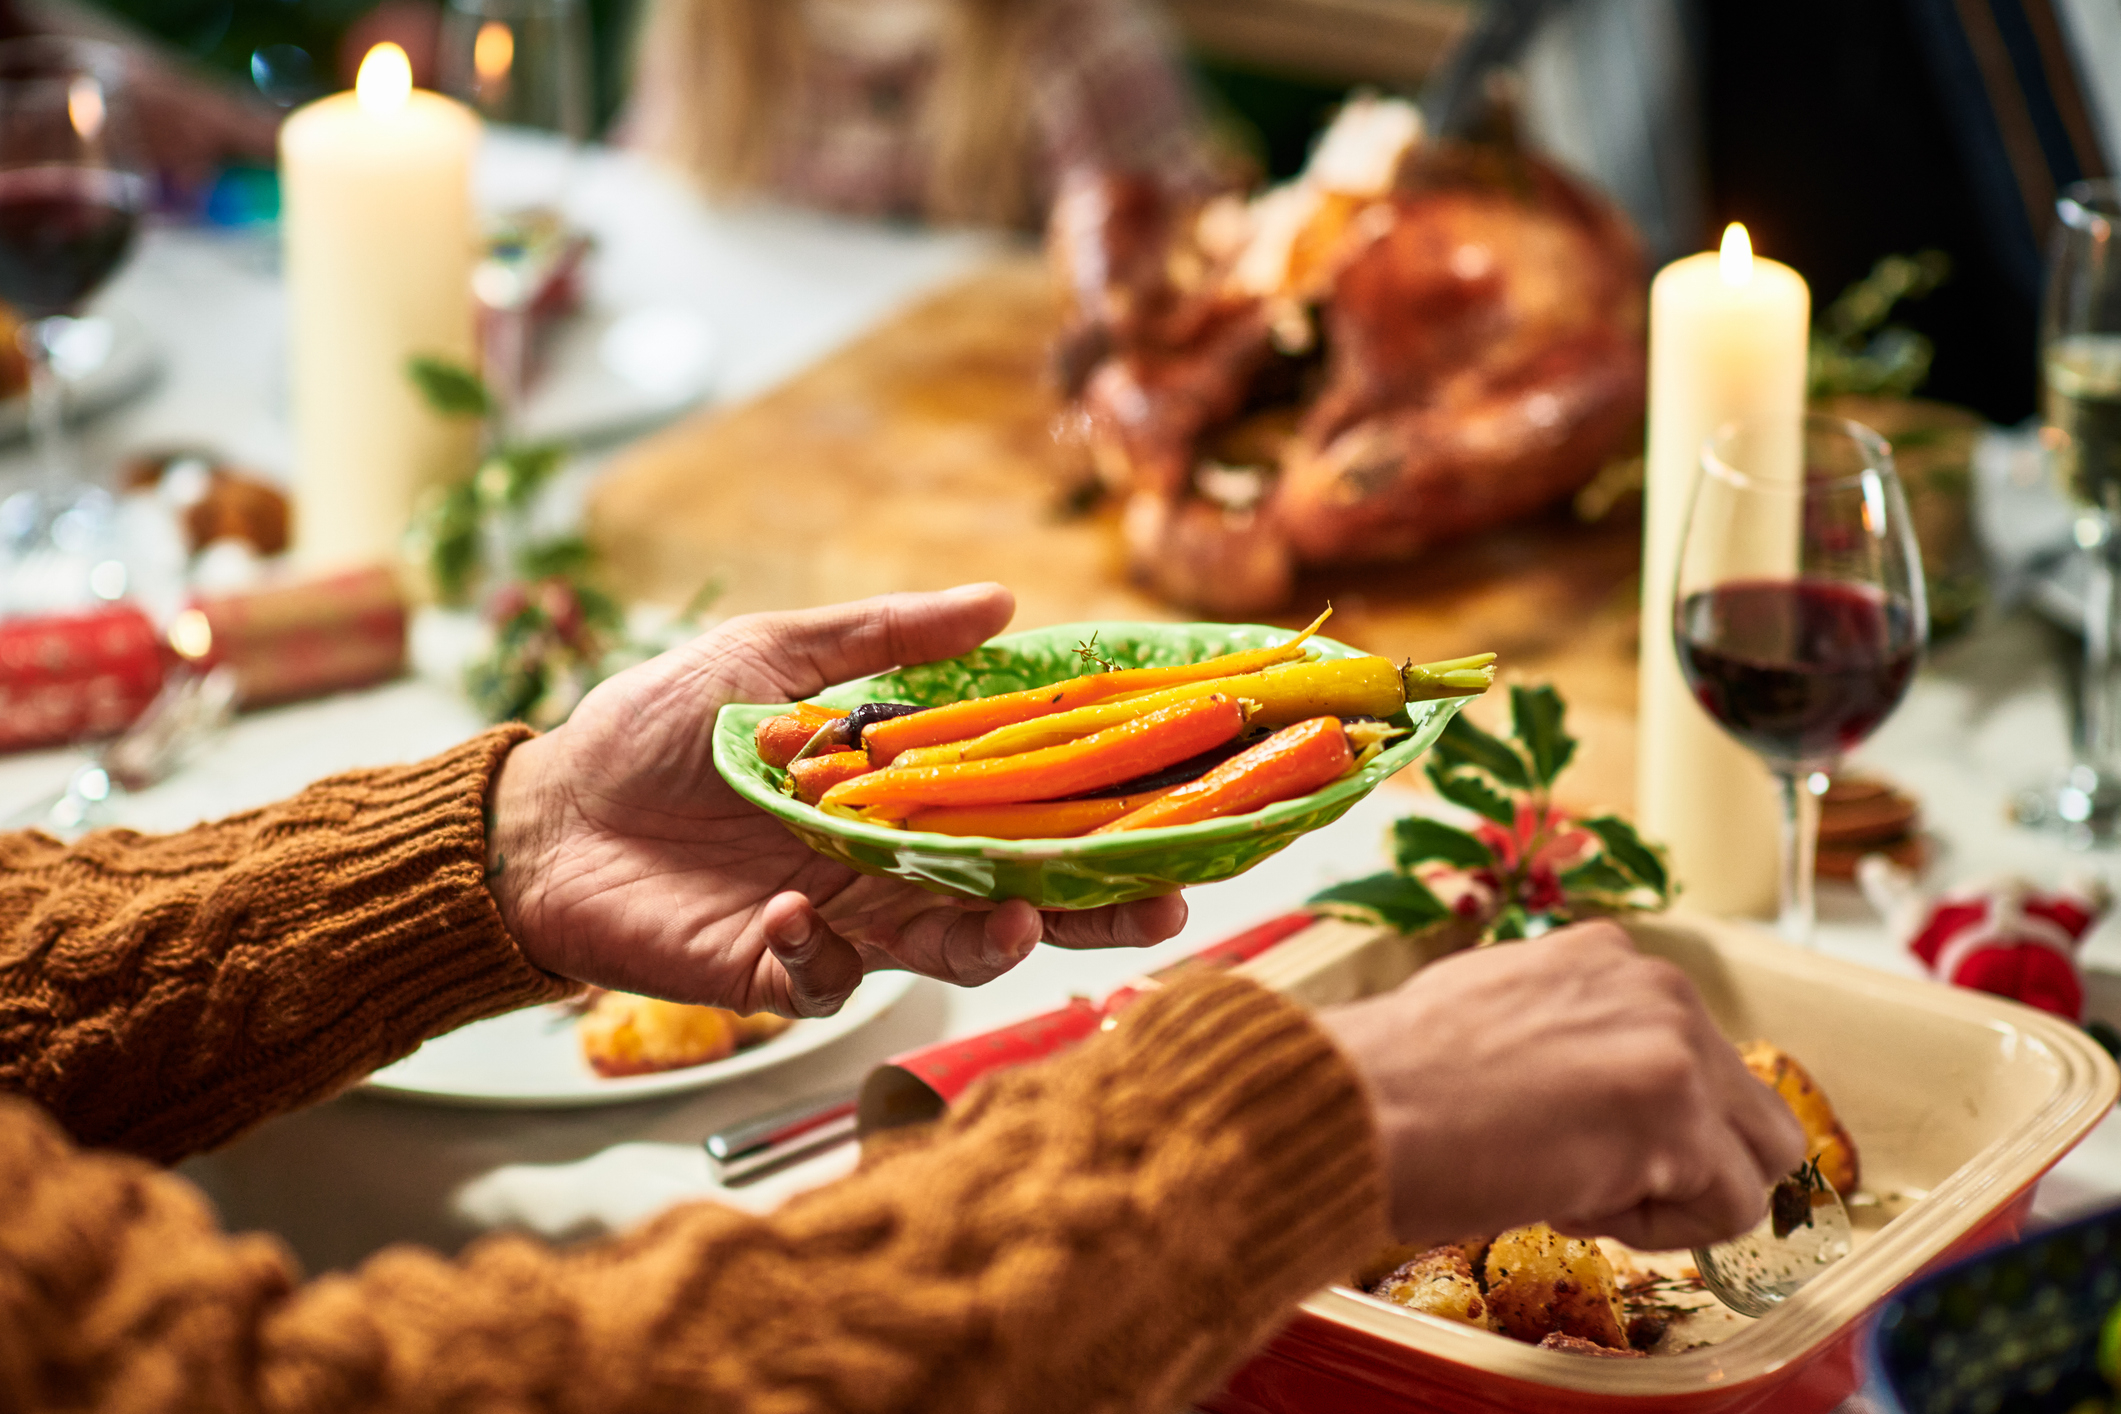 Person holding a plate of vegetables at a festive table with a turkey centerpiece